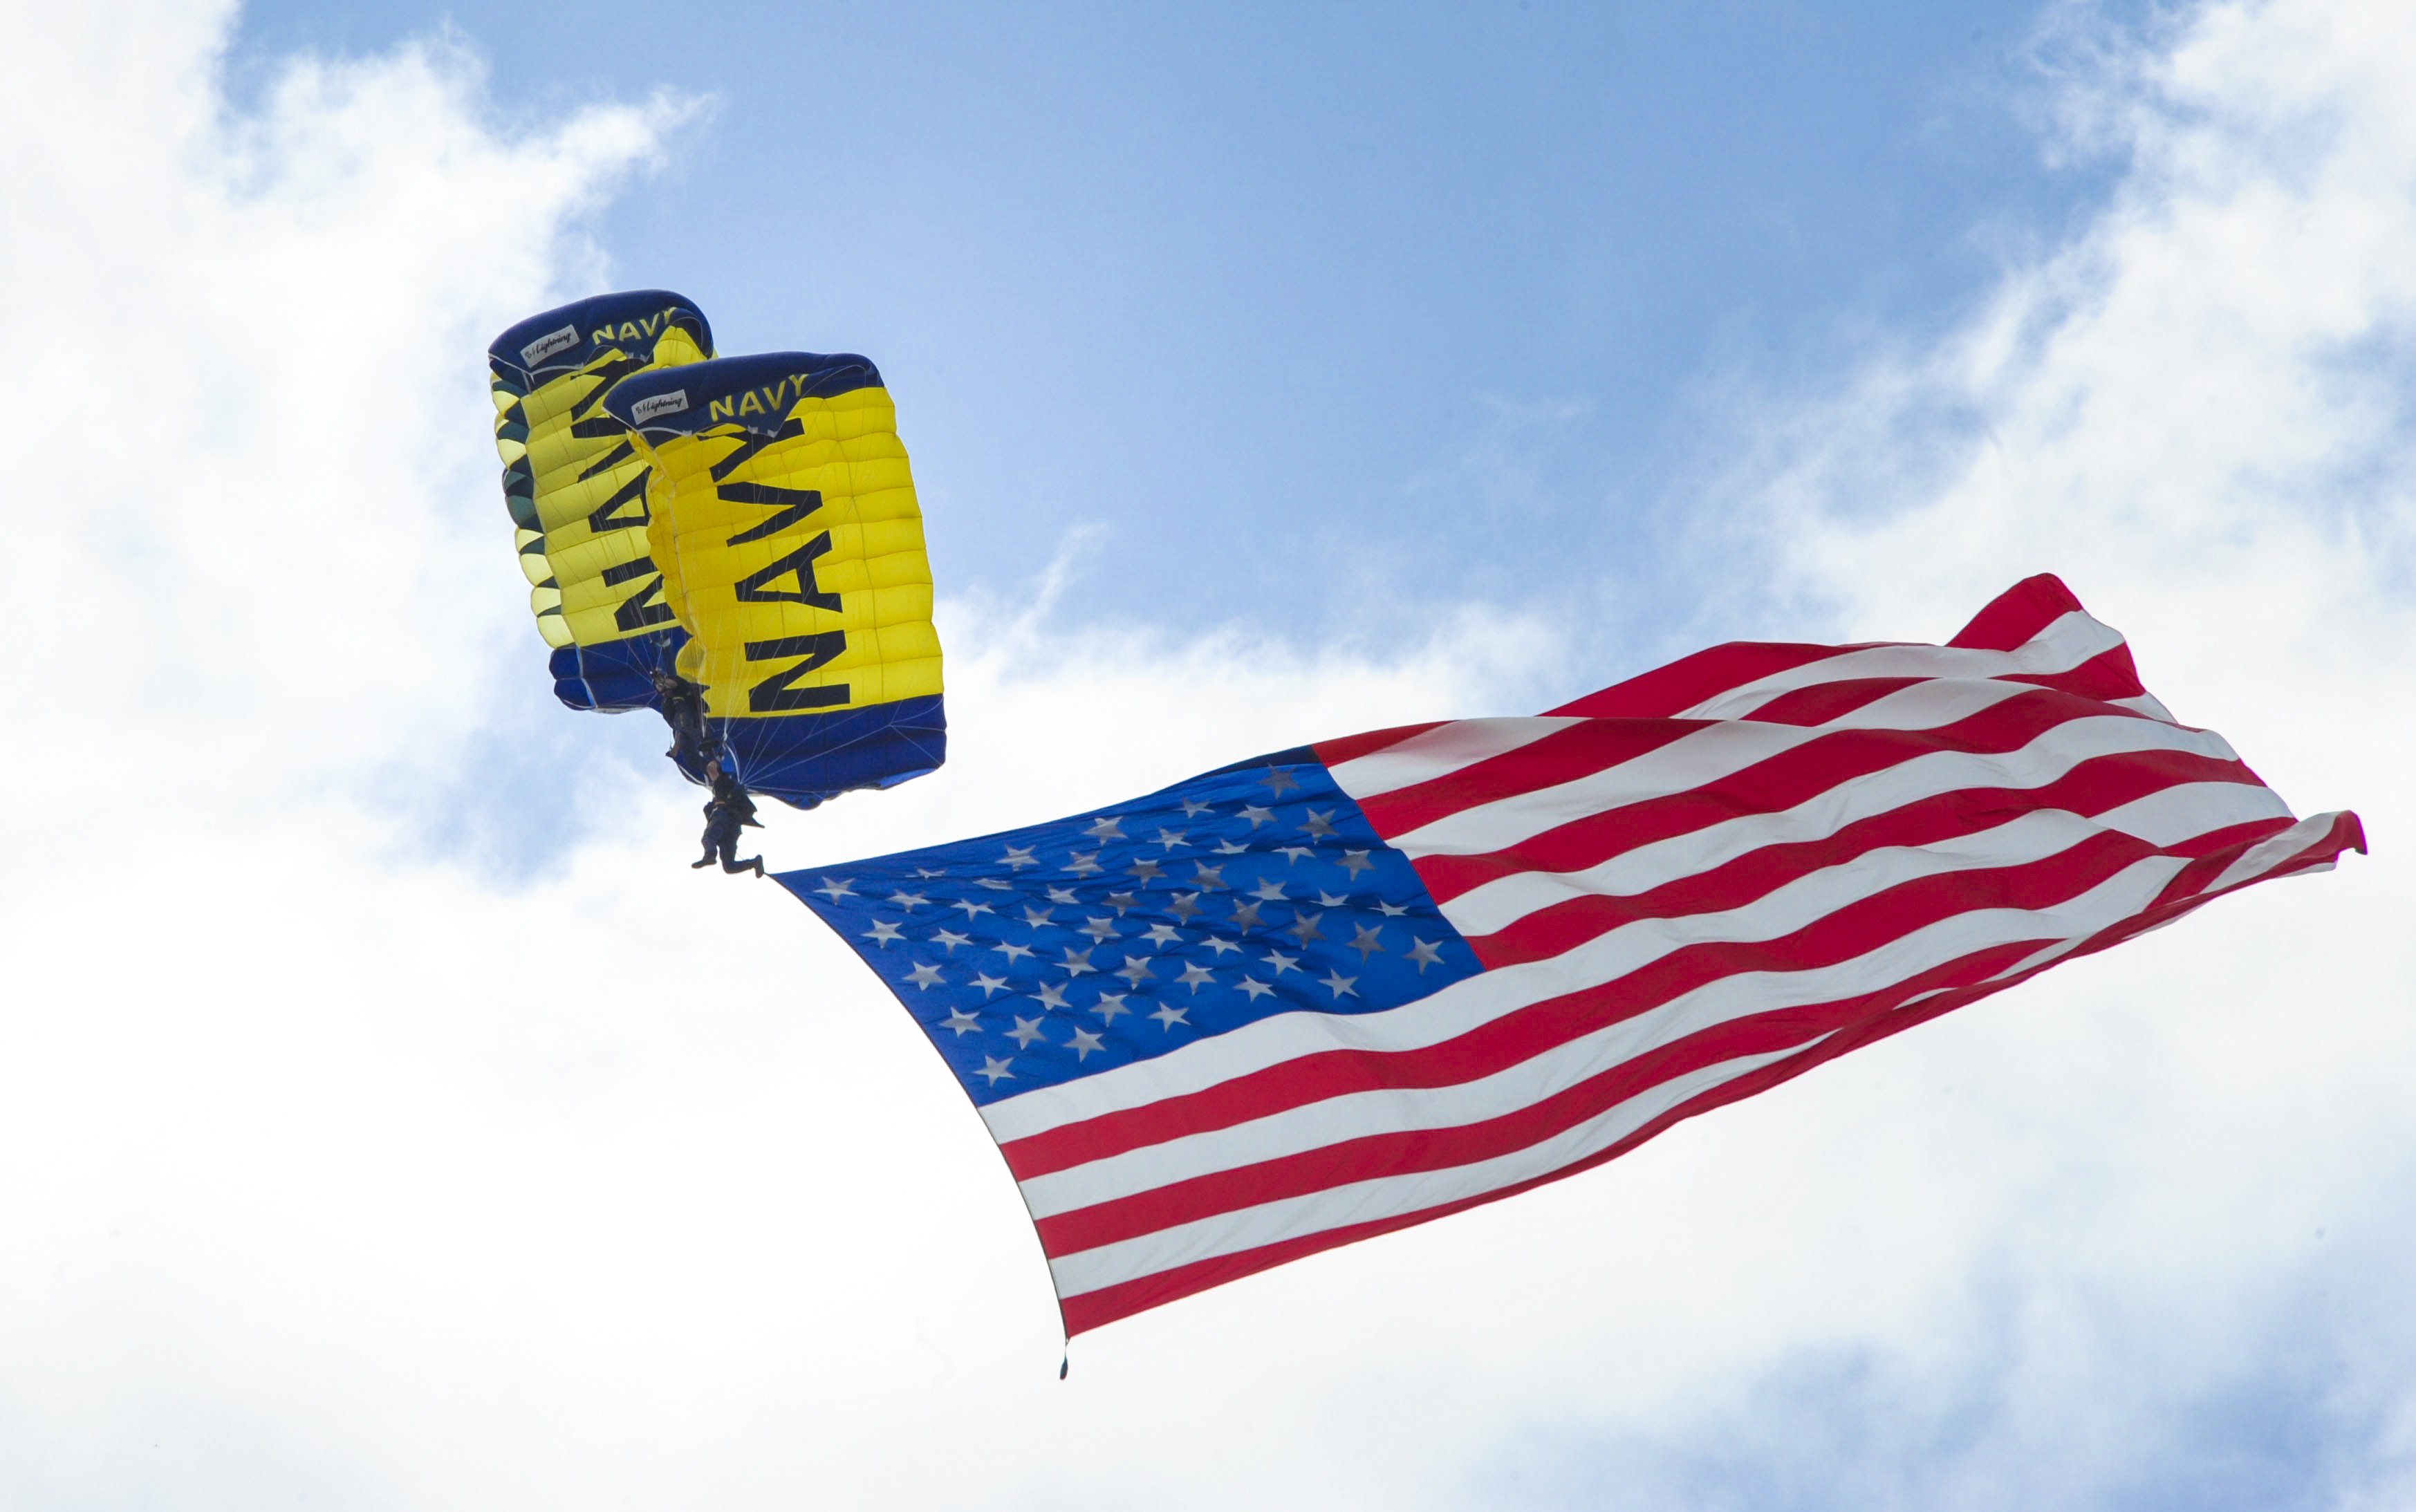 Parachute Rigger 1st Class Victor Maldonado (bottom) and Special Warfare Operator 1st Class T.J. Amdahl, members of the Navy Parachute Team, the Leap Frogs, fly the American flag as they perform a biplane maneuver above the Circuit of The Americas racetrack at the Summer X Games